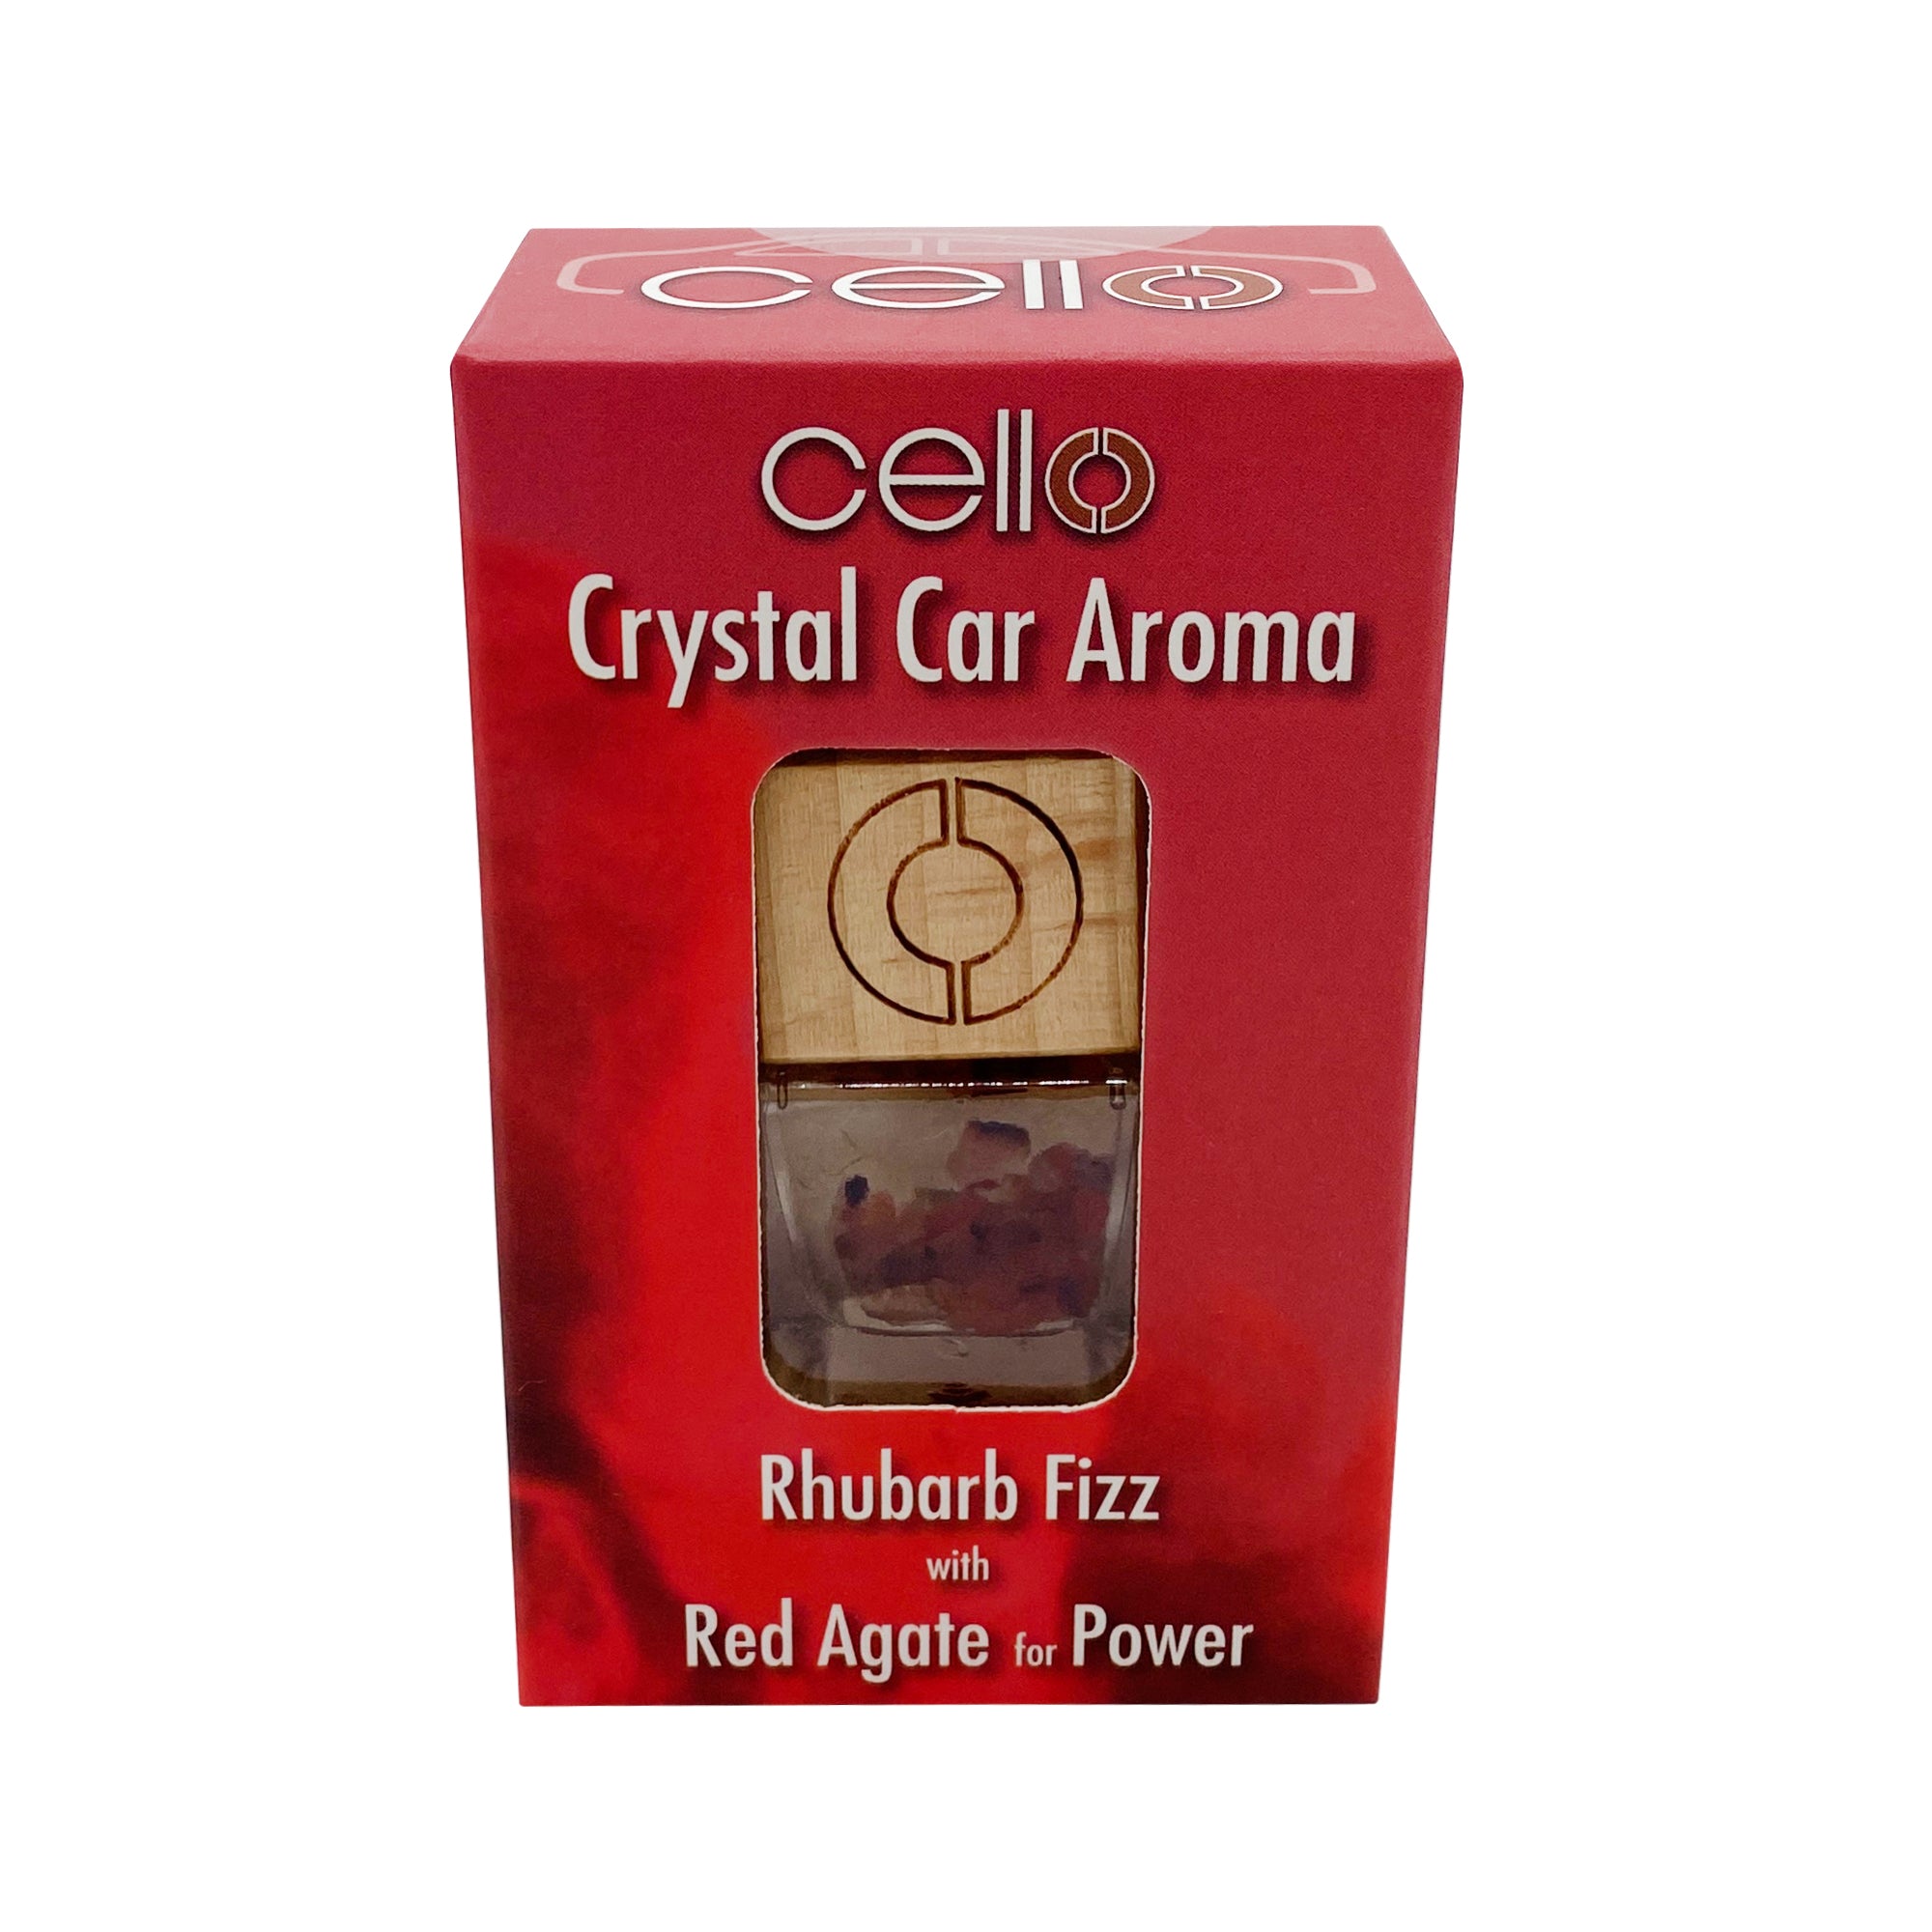 Cello - Crystal Car Aroma - Red Agate - Rhubarb Fizz